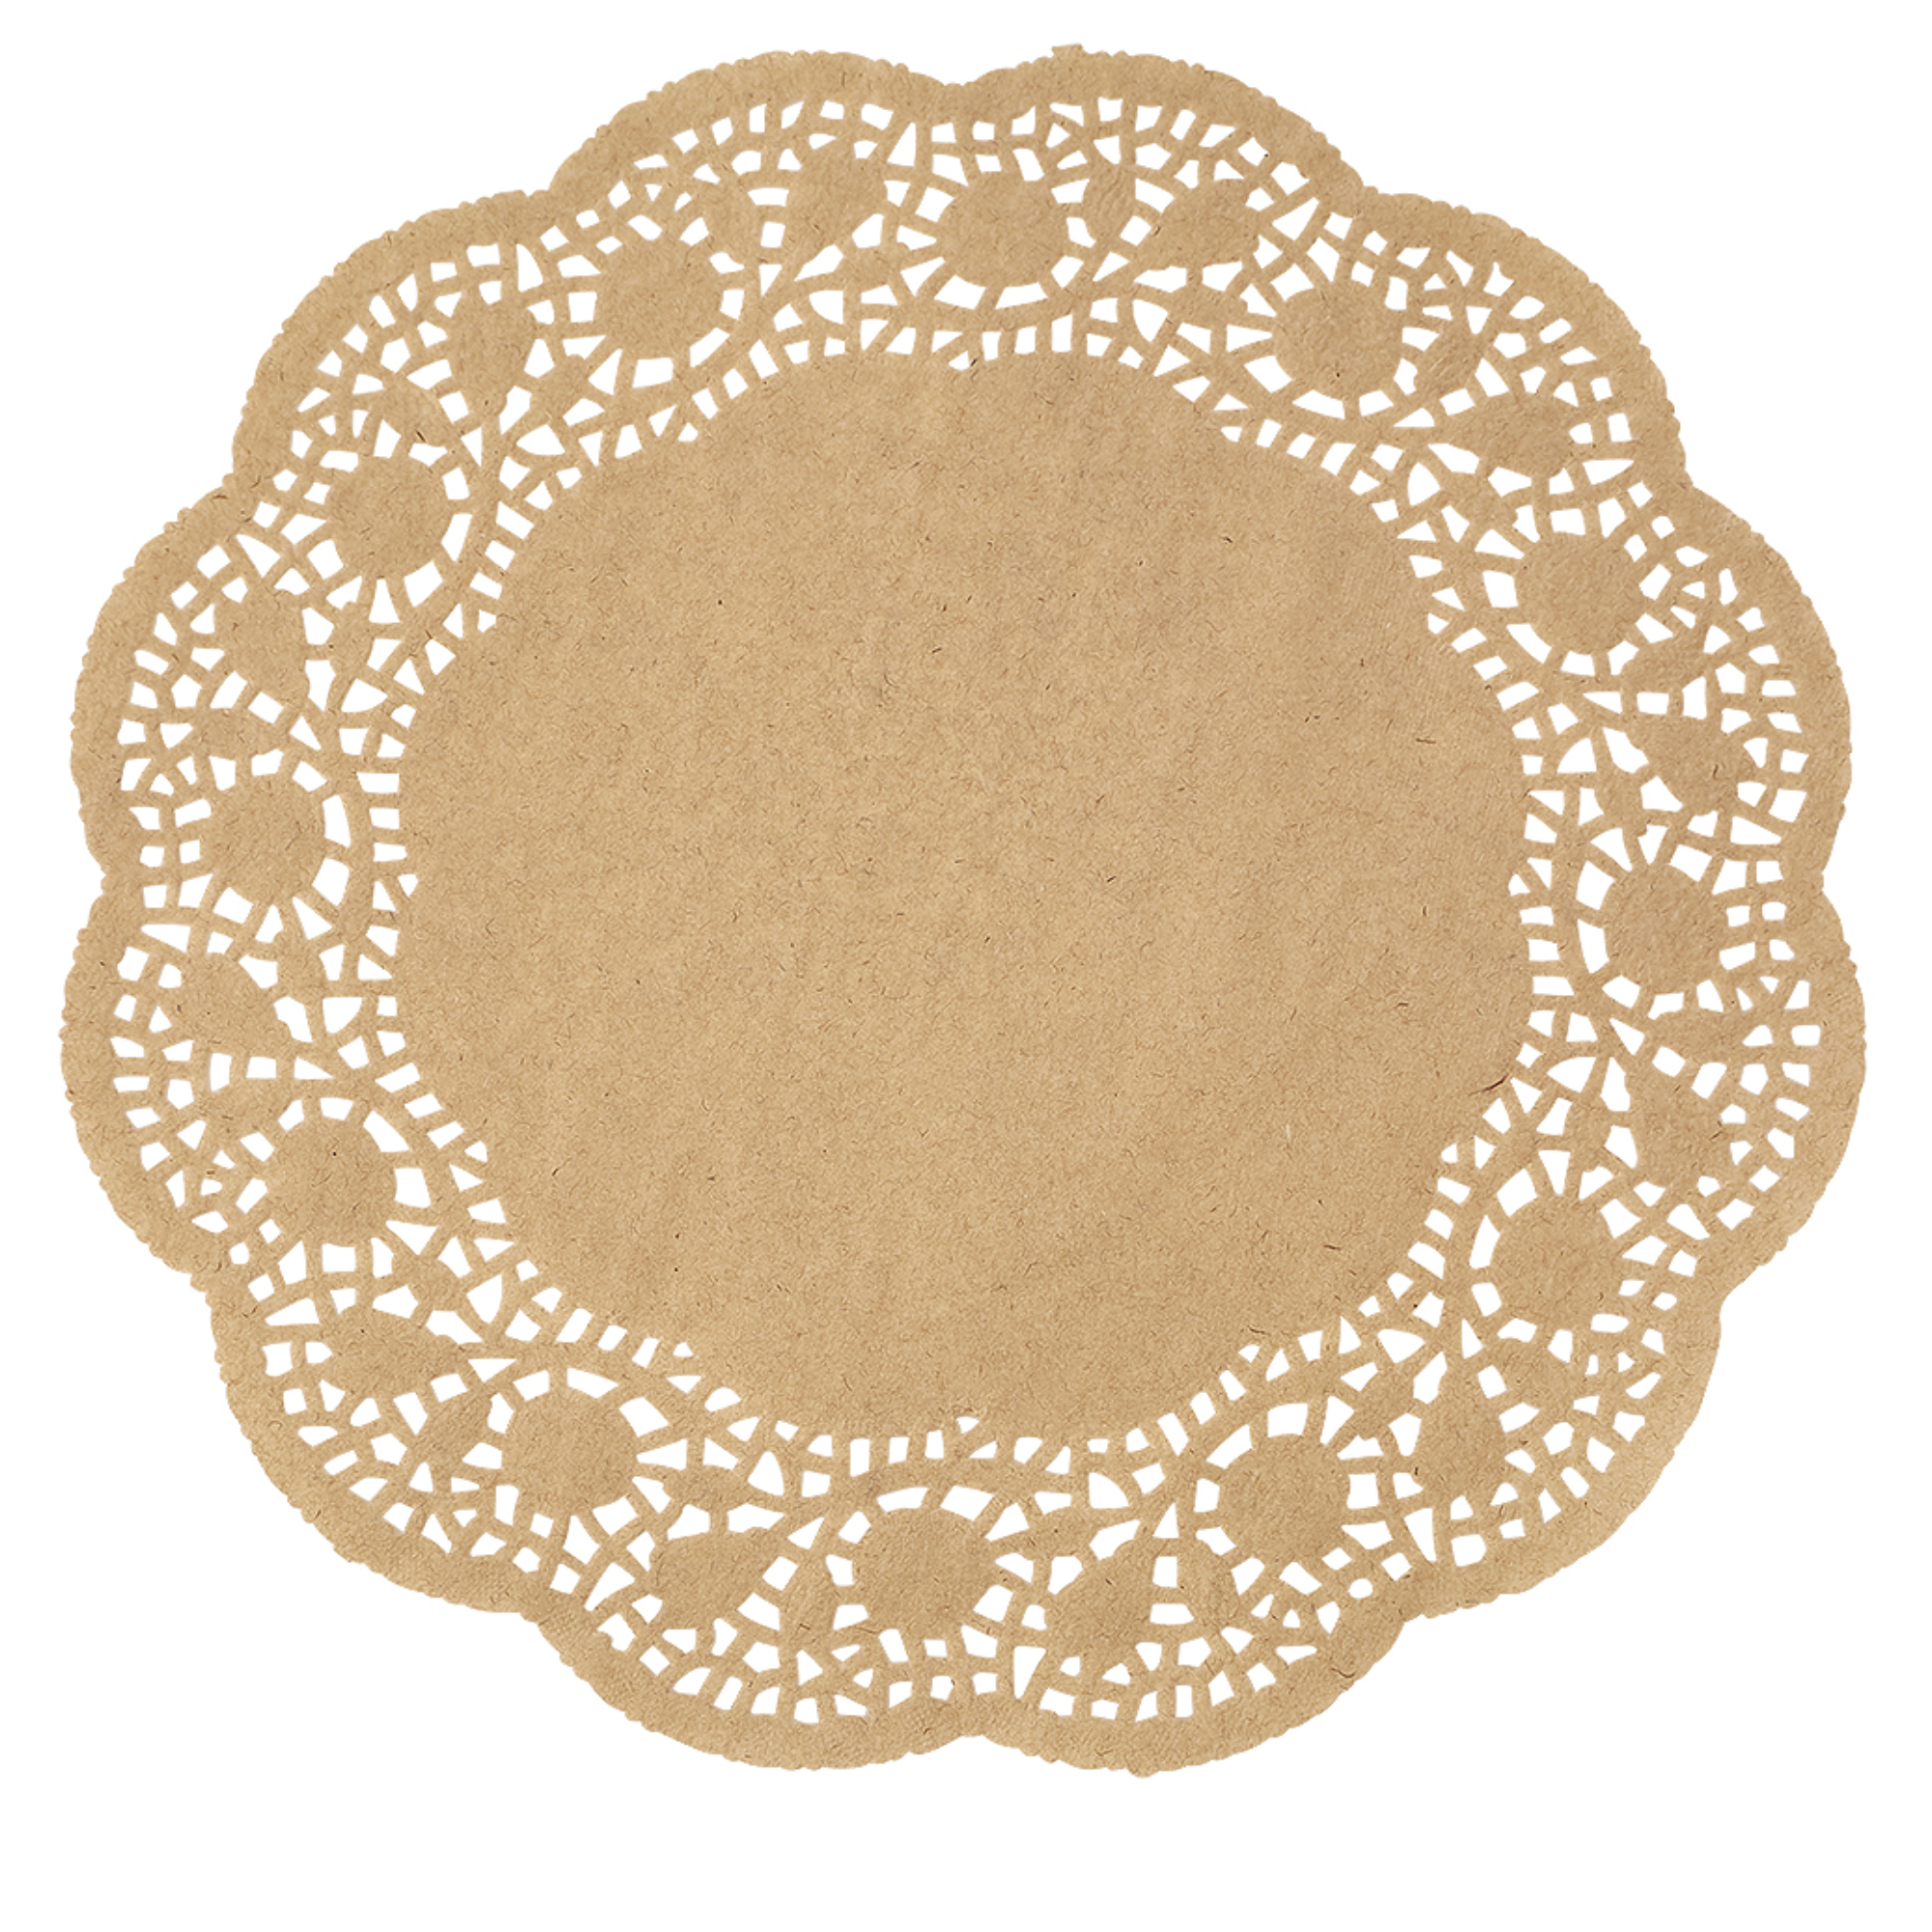 Round Paper Doilies 10" 250pc/bag - Natural